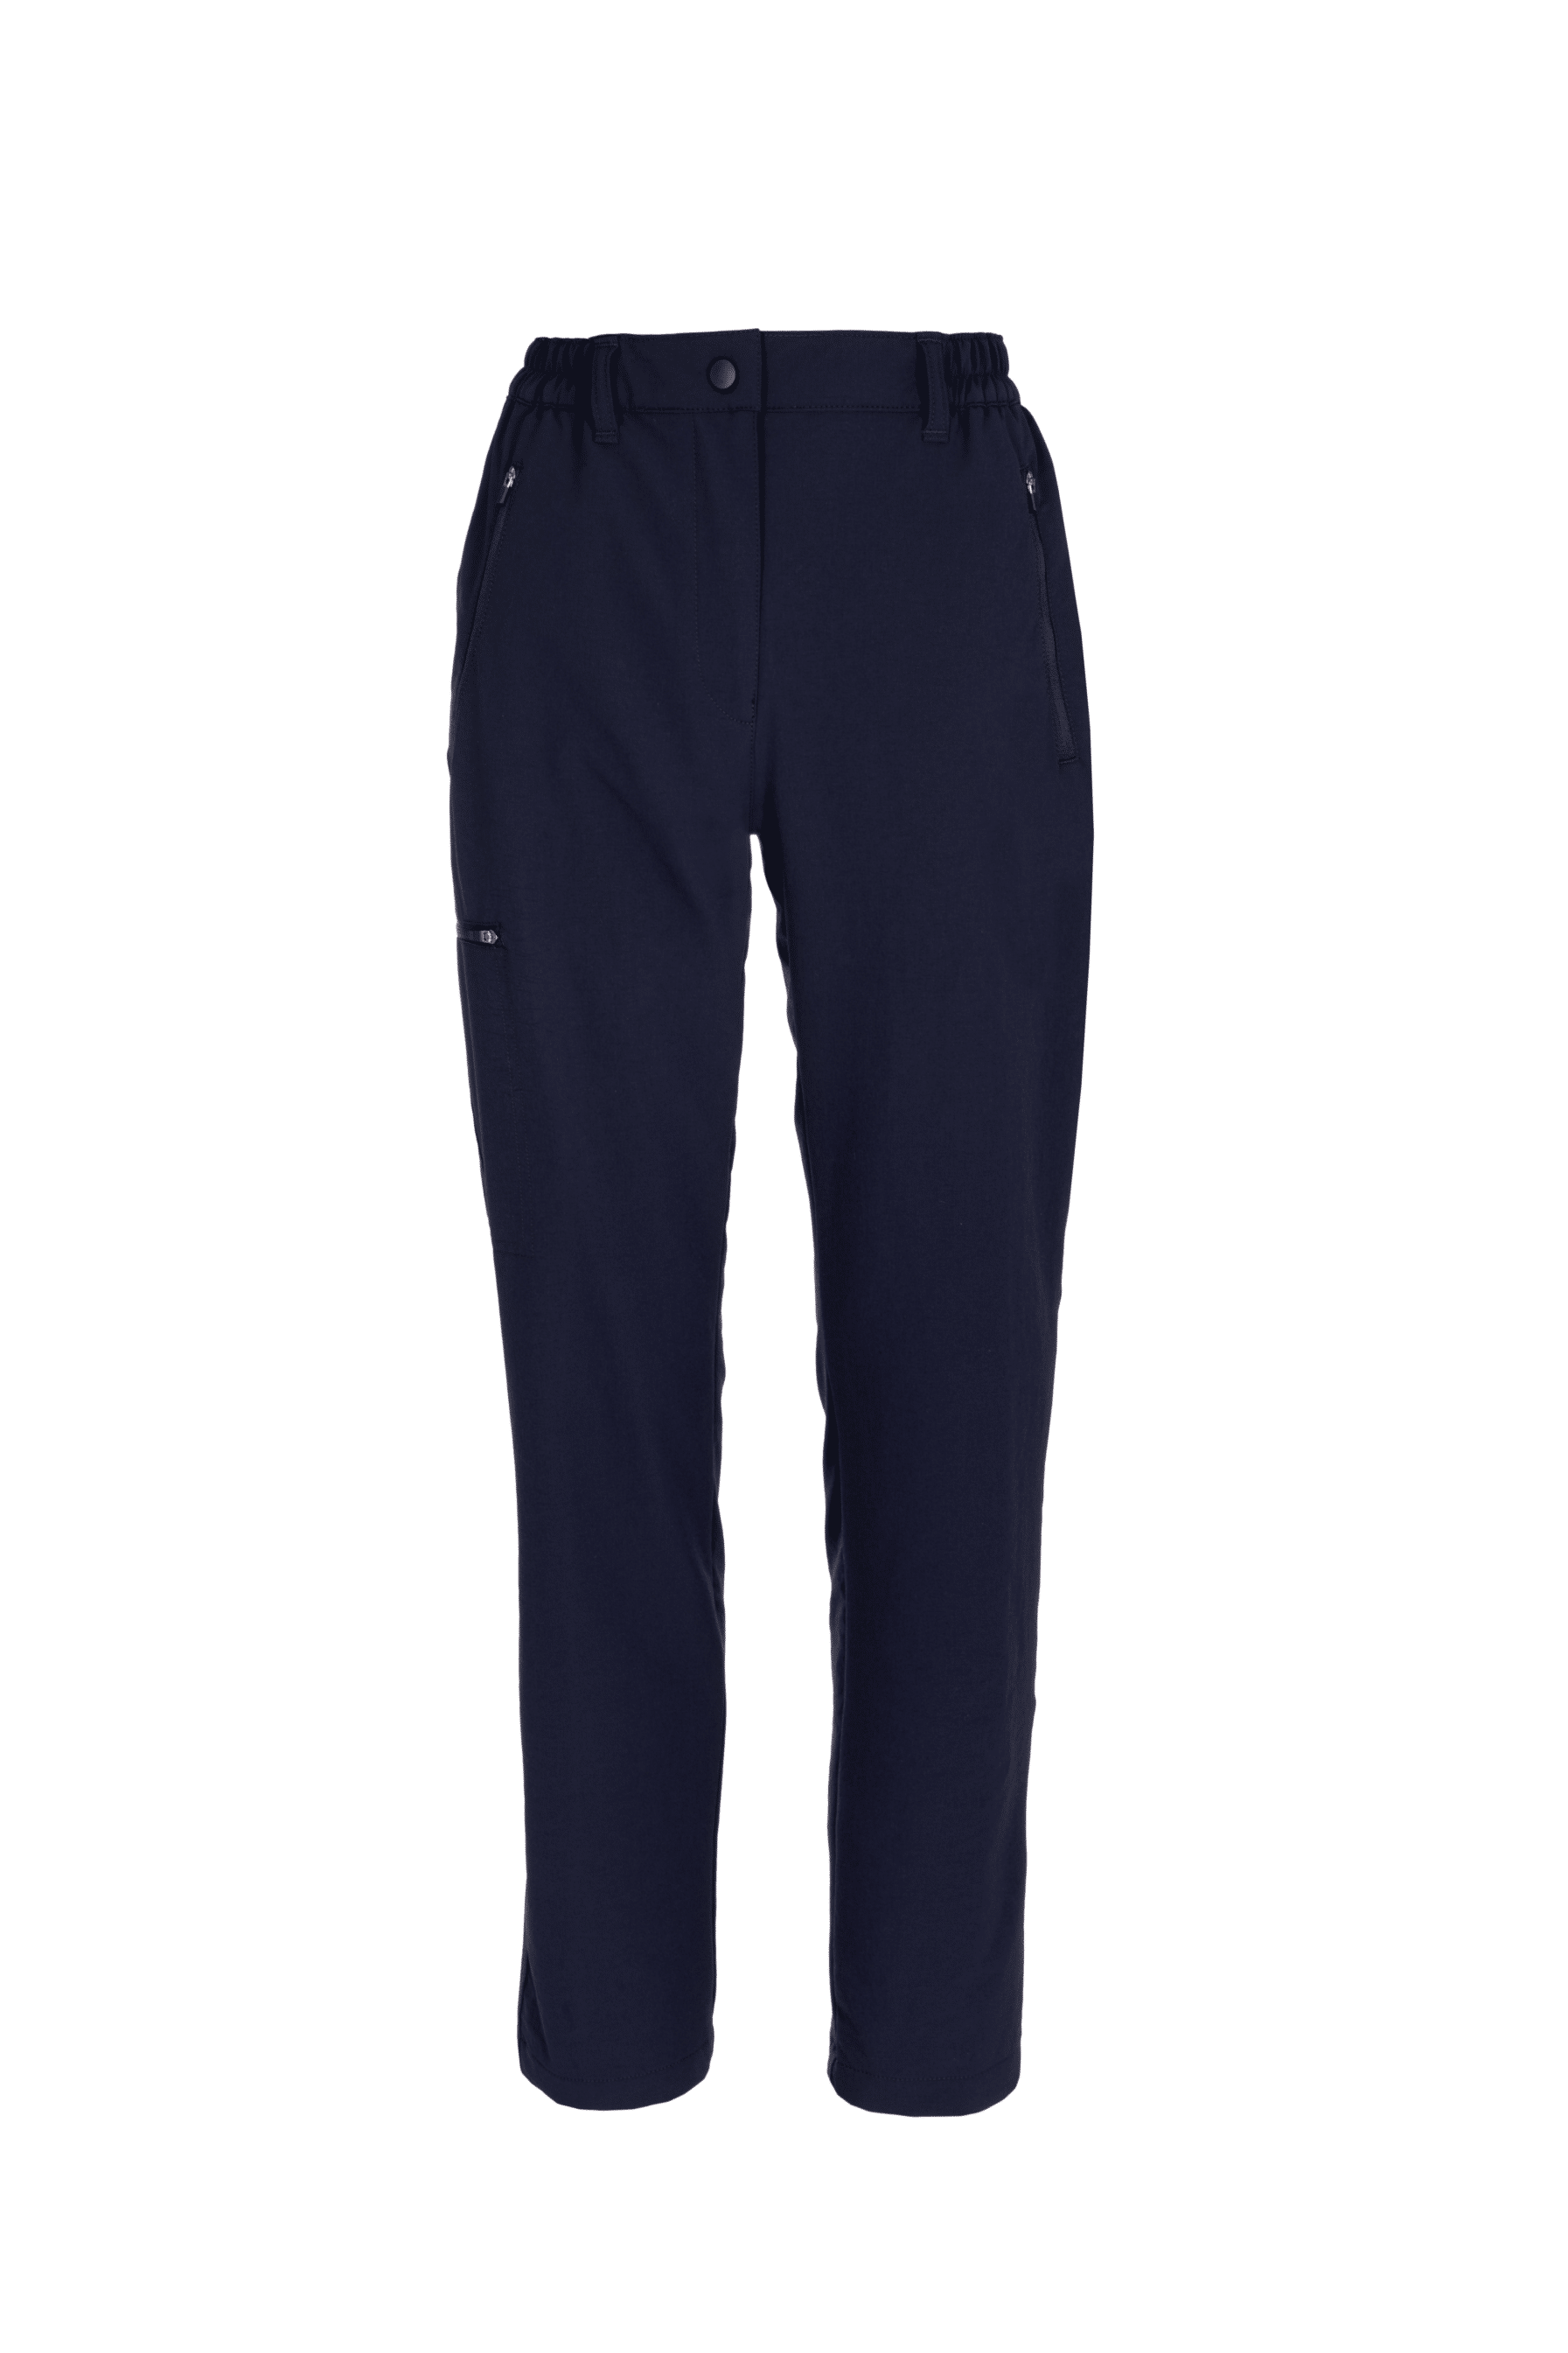 Silverpoint womens langdale trousers navy